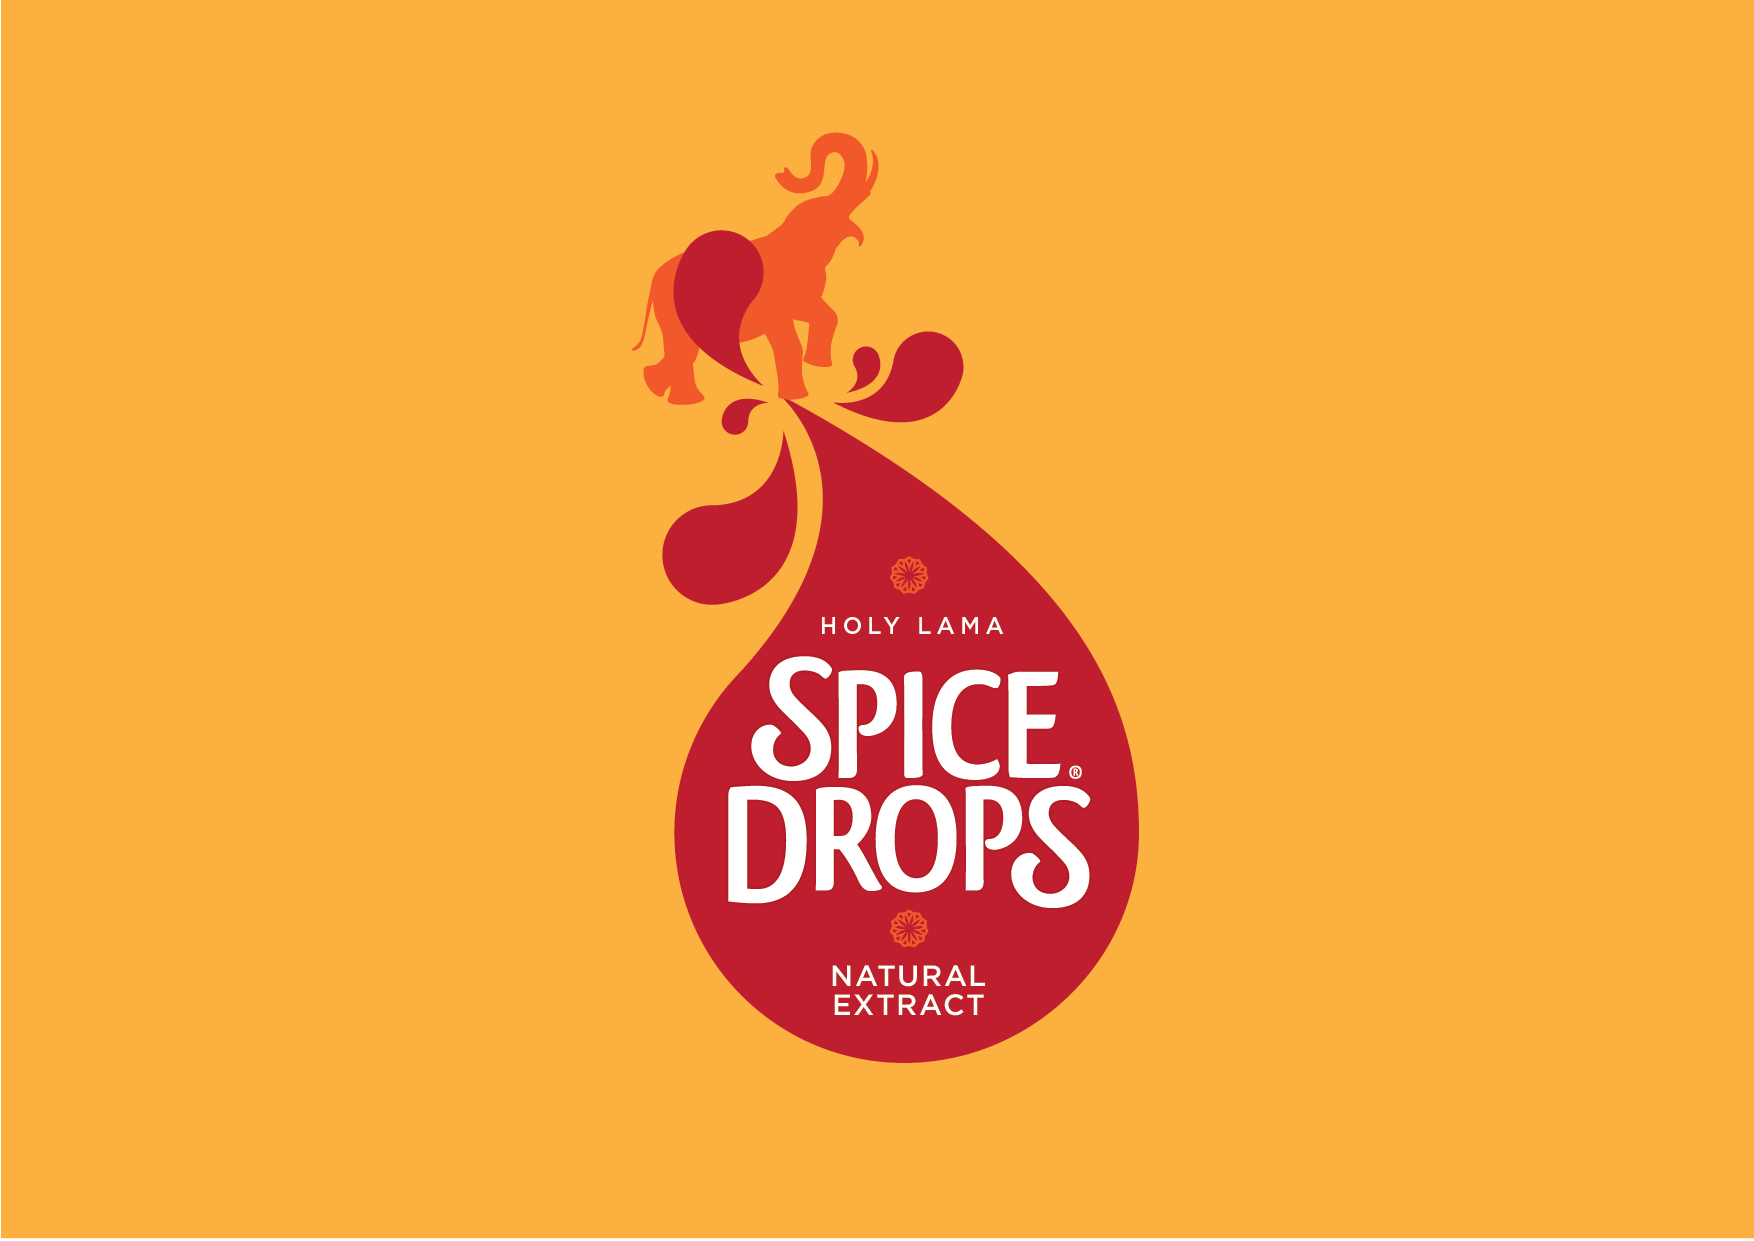 IMAGES FOR WEBSITE_SPICE DROPS-01.png